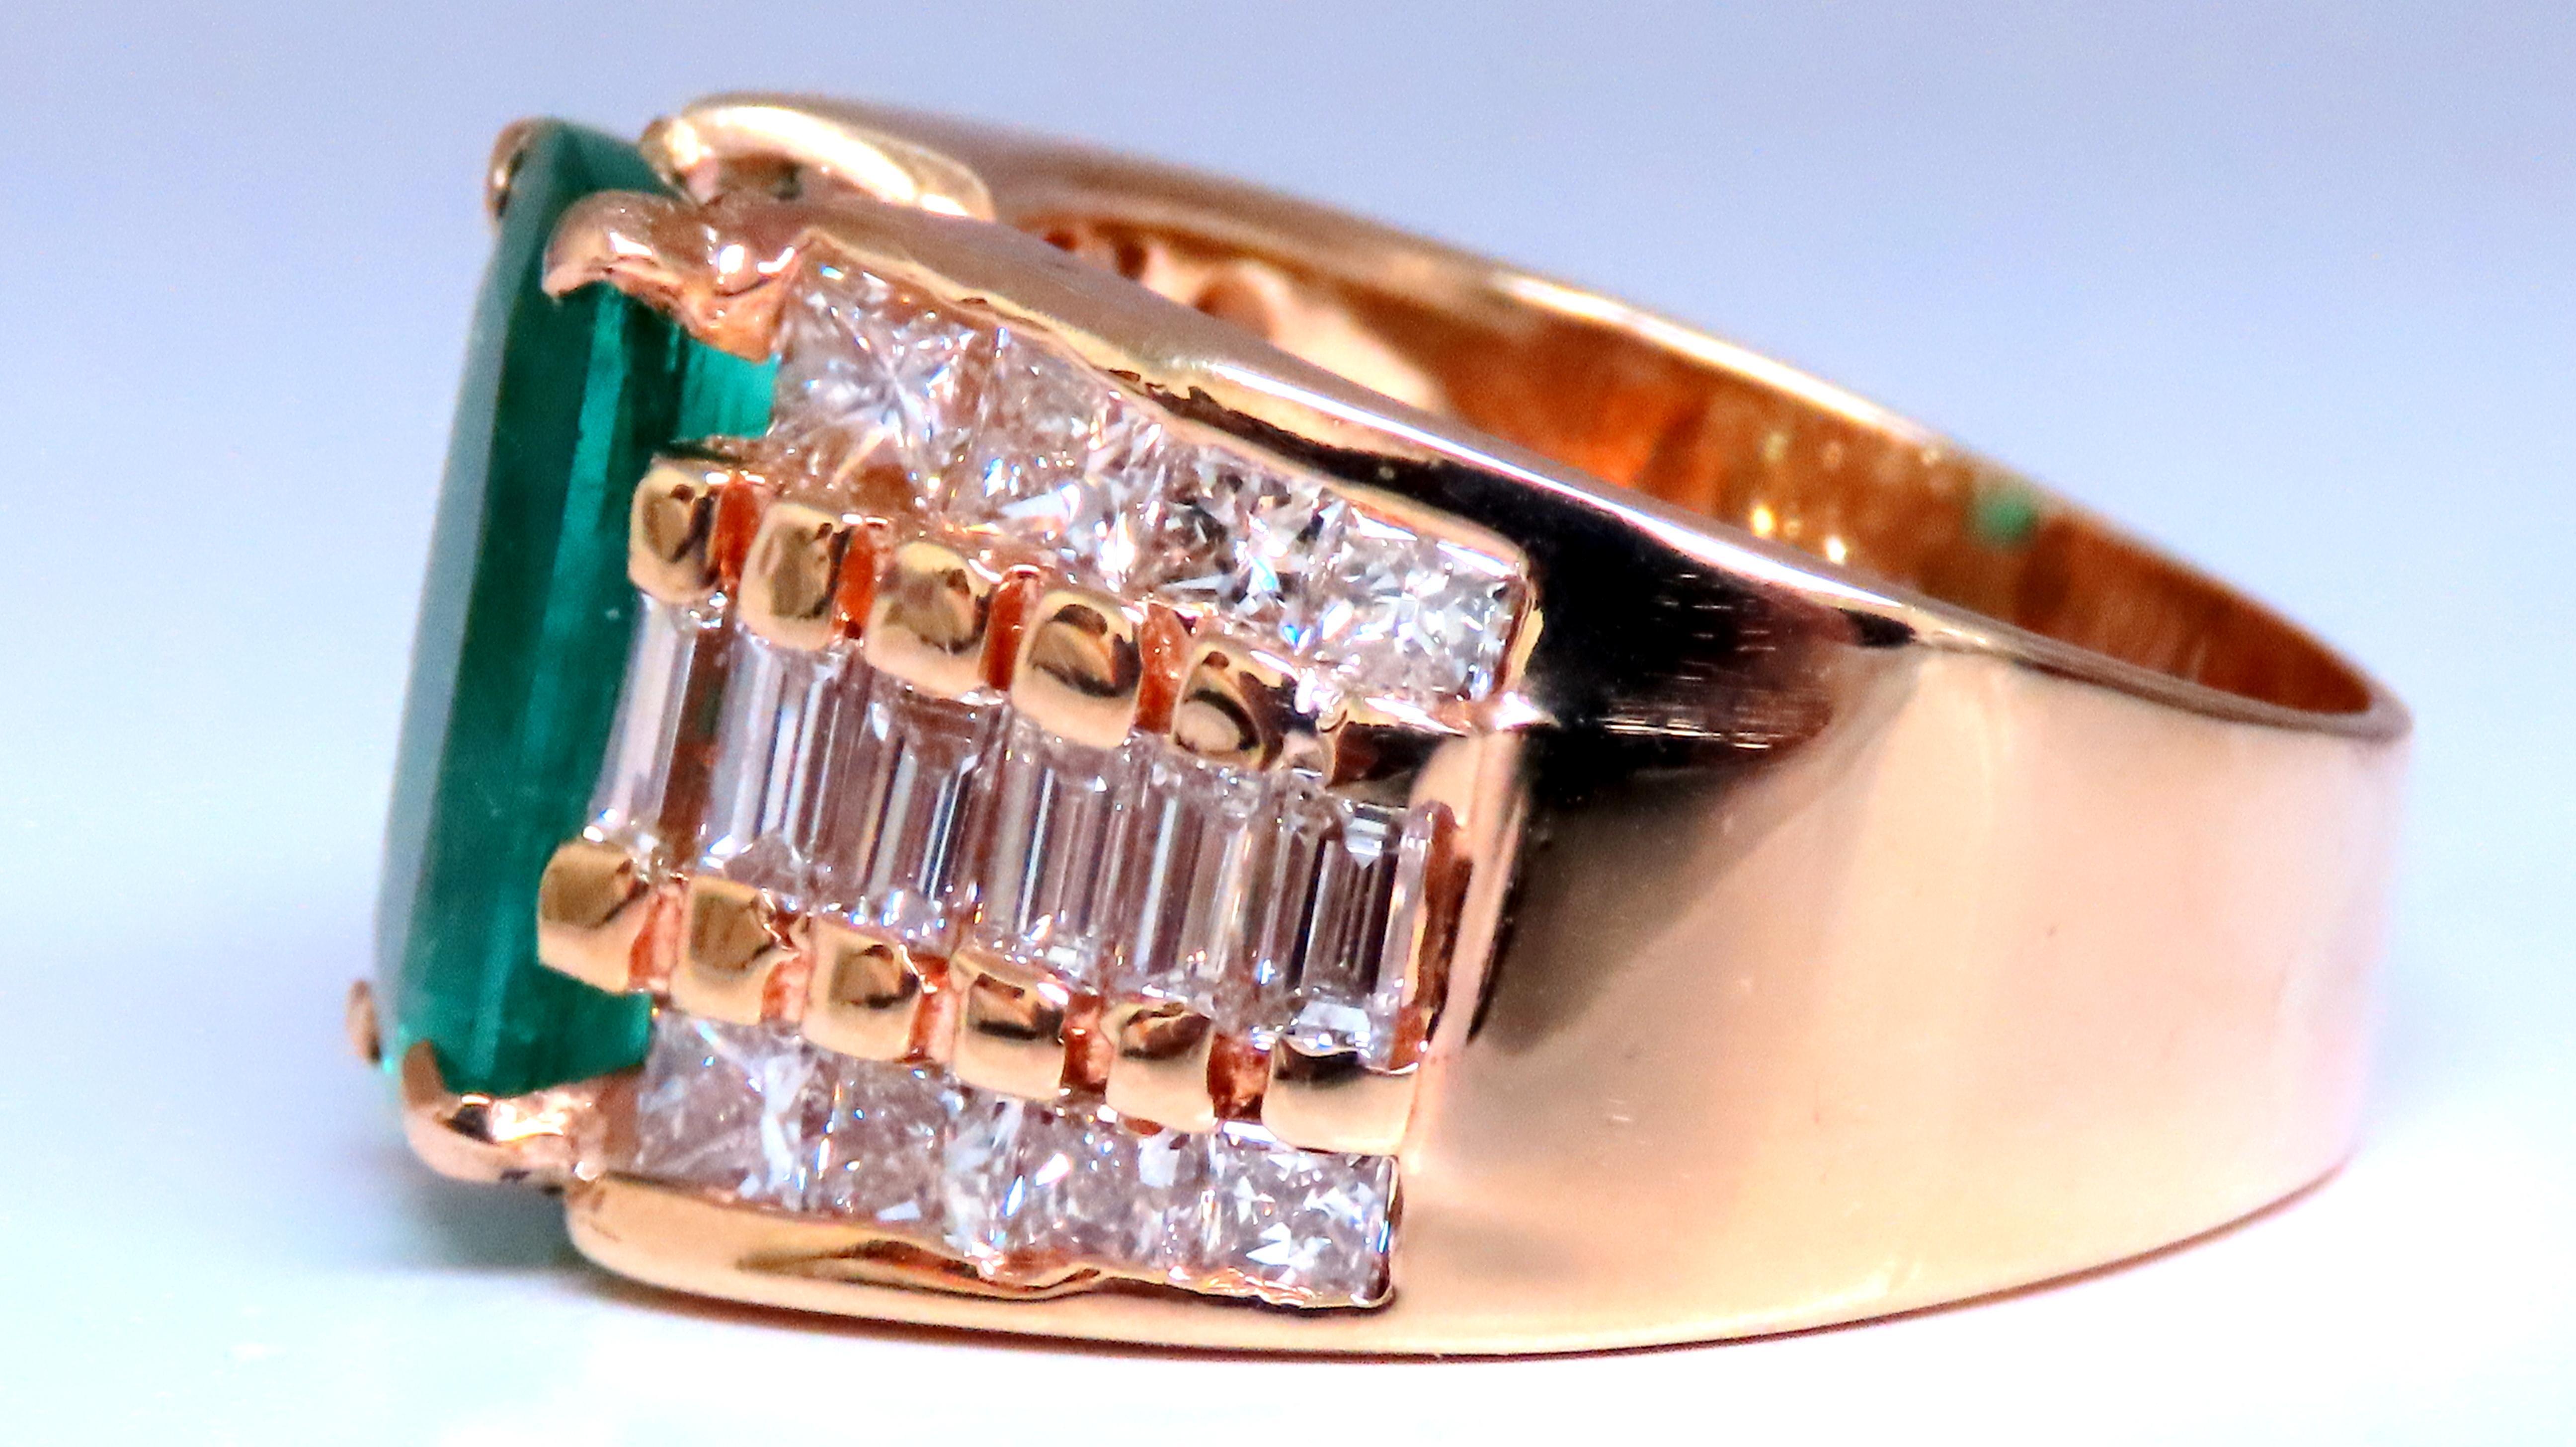 GIA Certified 3.01ct Natural Emerald Diamonds Ring 14kt Gold 12360 In New Condition For Sale In New York, NY